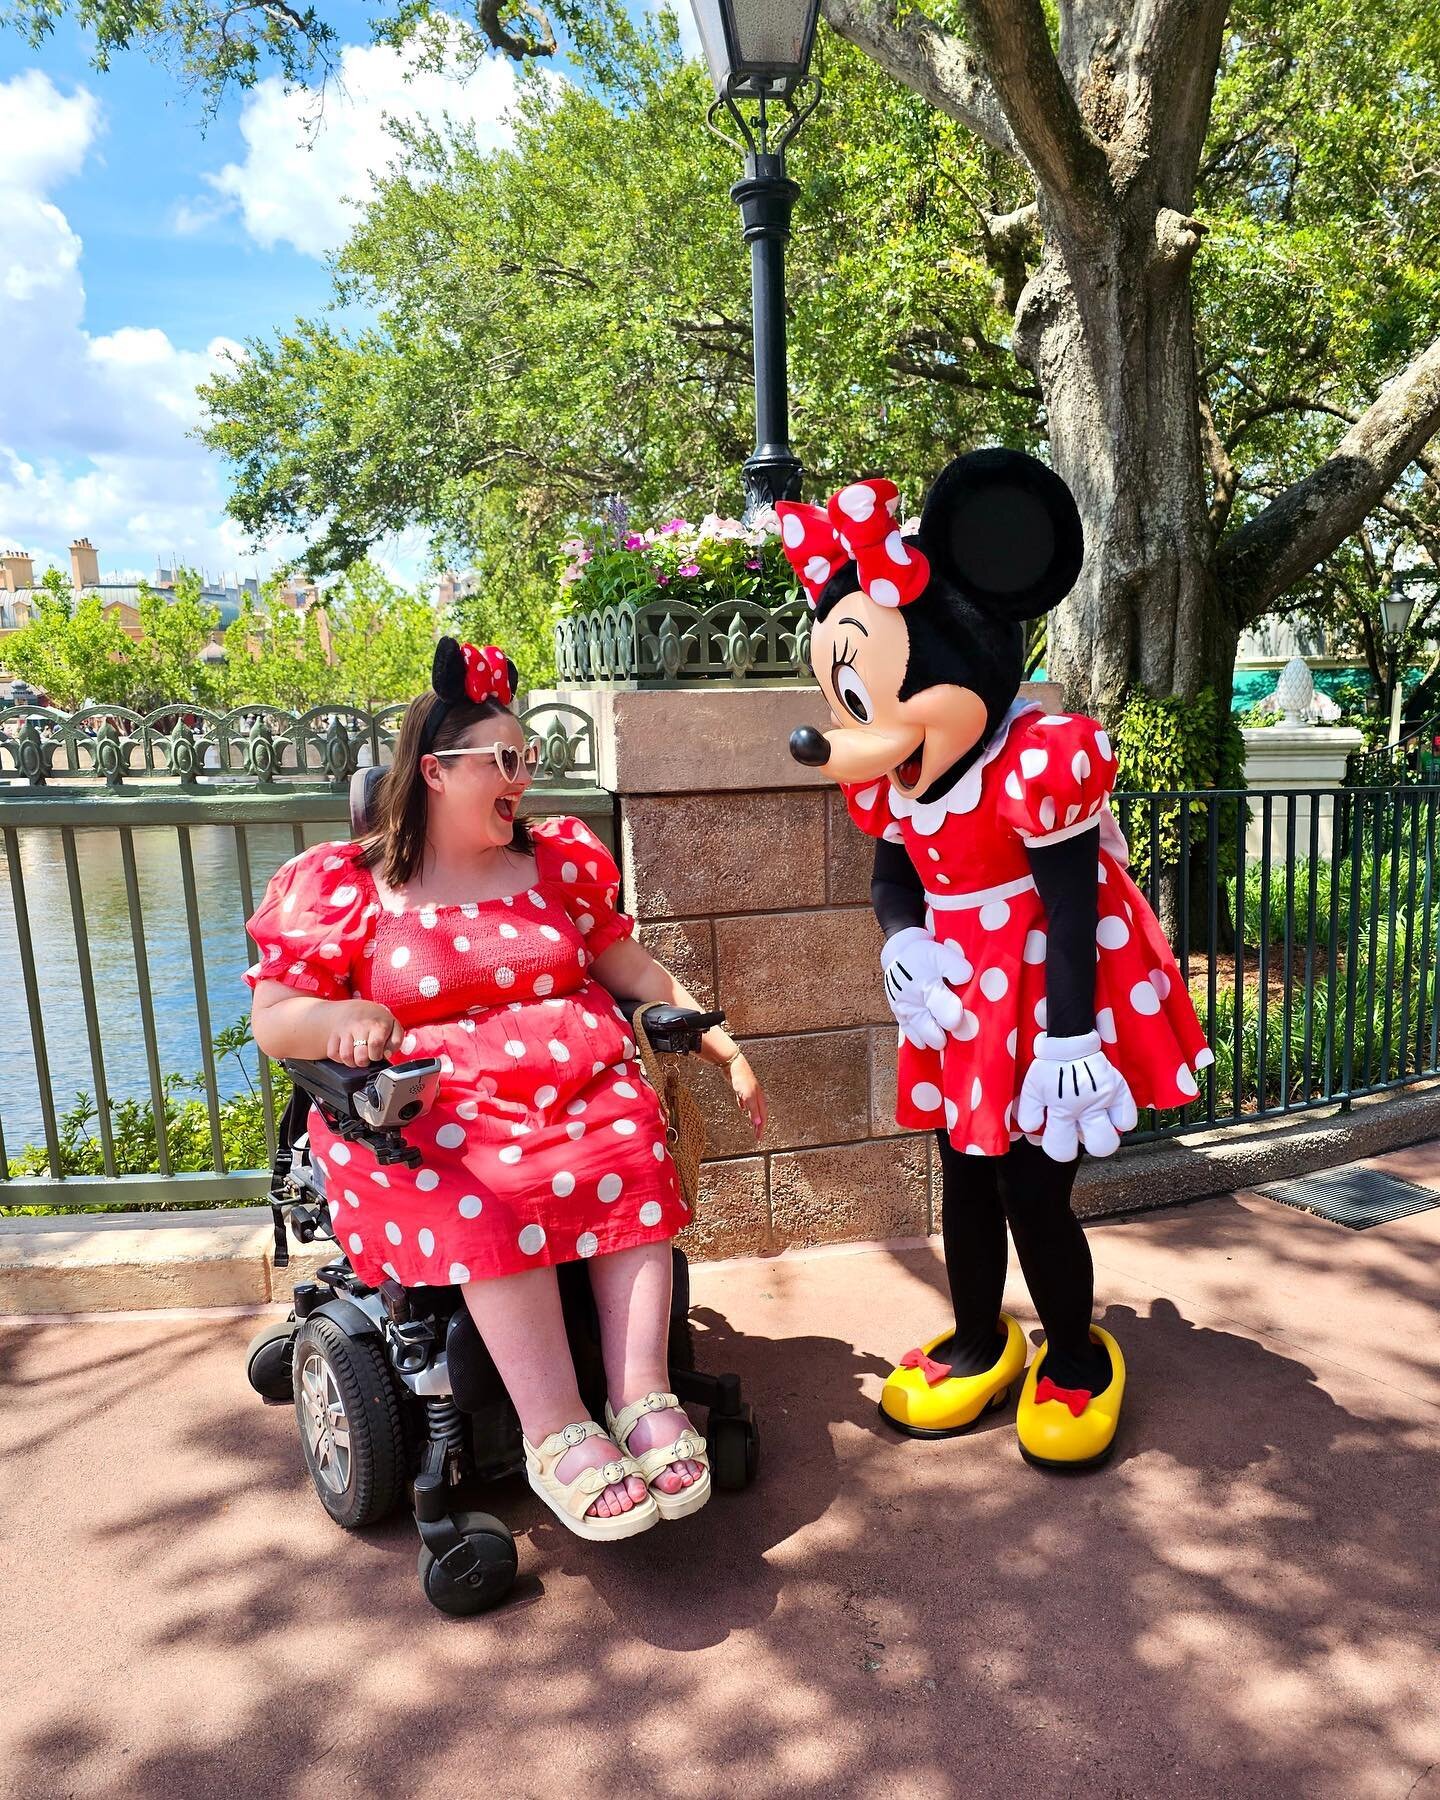 FRIDAY TWINNING! ❤️😍👯&zwj;♀️

Headed into Epcot yesterday for the last time, in my red spot dress (that I&rsquo;d forgotten to wear so far 🙈) and Minnie was there ready for our twinning moment! Her reaction was amazing, I&rsquo;ll have to put it i